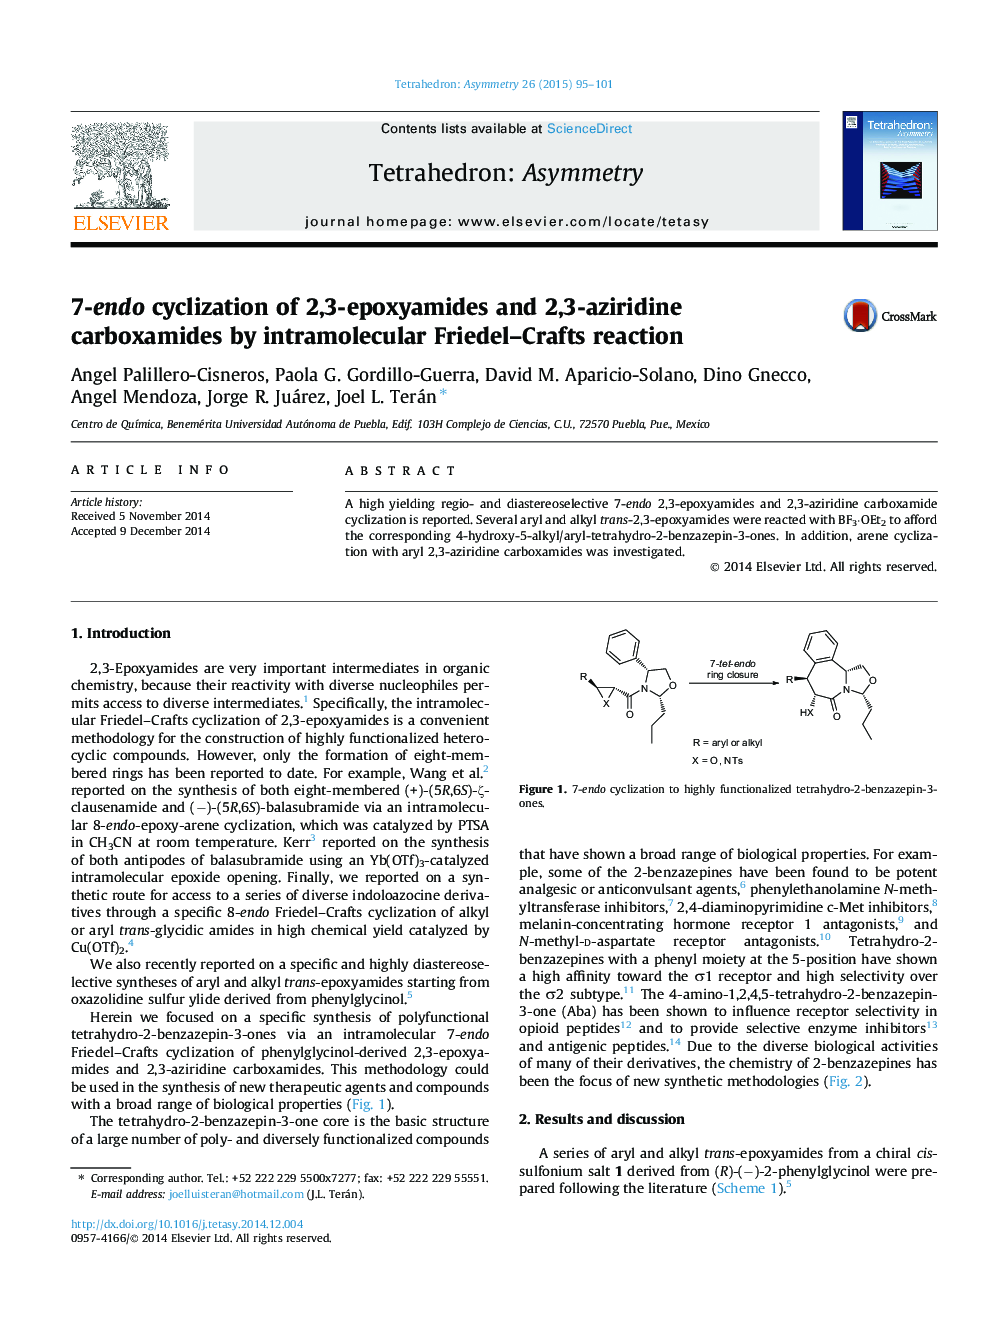 7-endo cyclization of 2,3-epoxyamides and 2,3-aziridine carboxamides by intramolecular Friedel–Crafts reaction